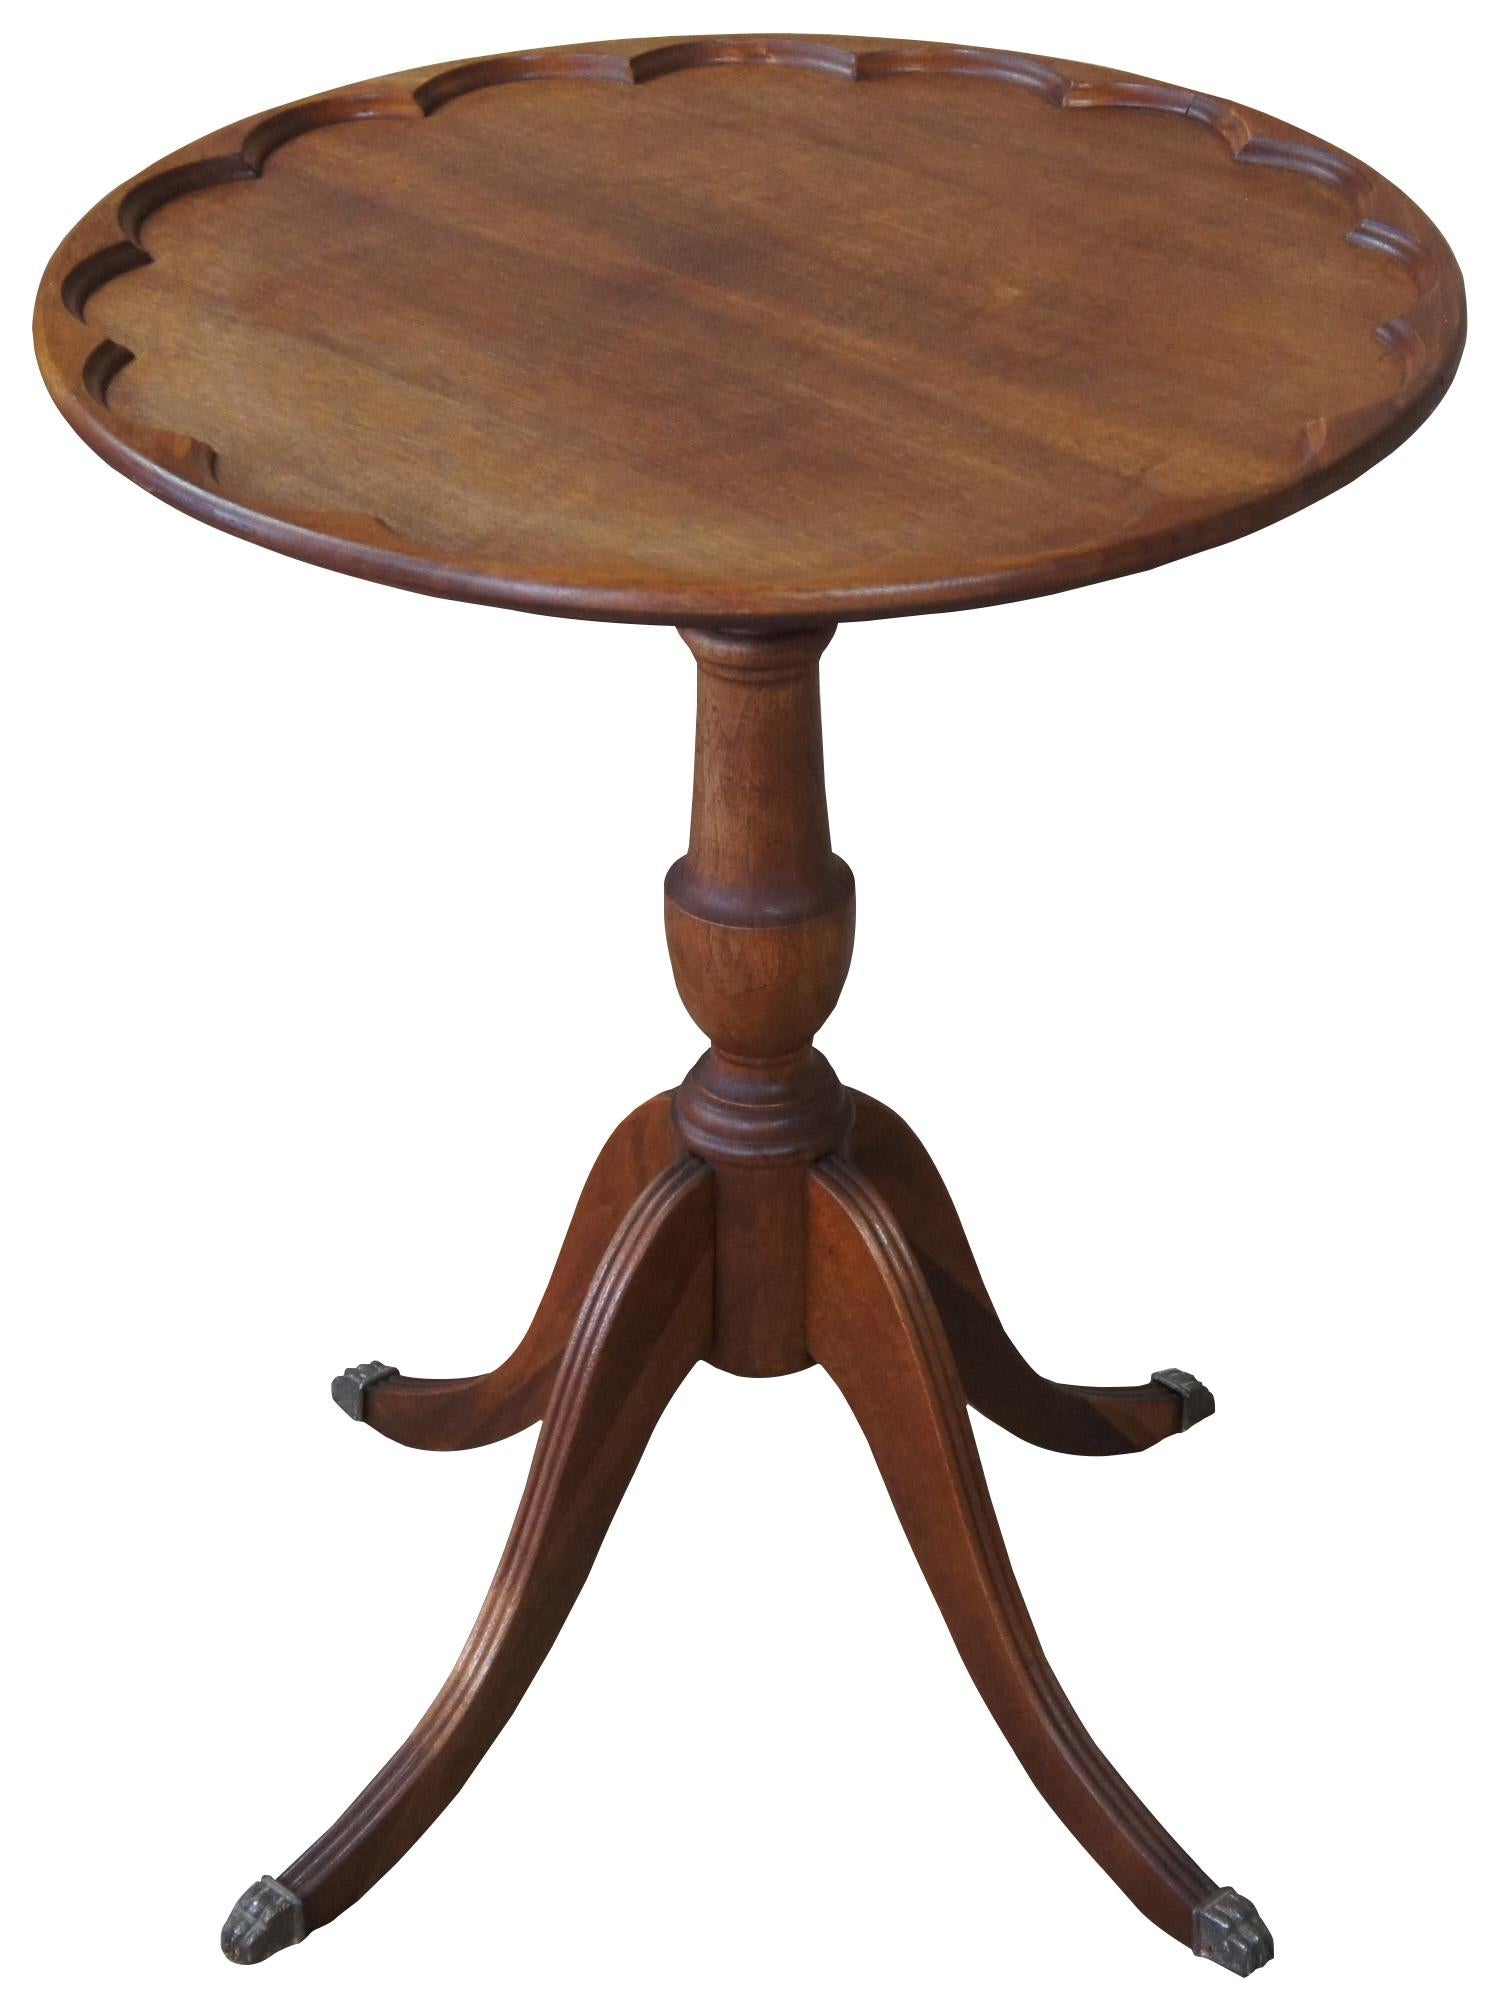 Circa 1940s Duncan Phyfe pie crust table. Features a round top over a turned trophy shaped base leading to four fluted legs with brass capped paw feet. Measures: Feet 22